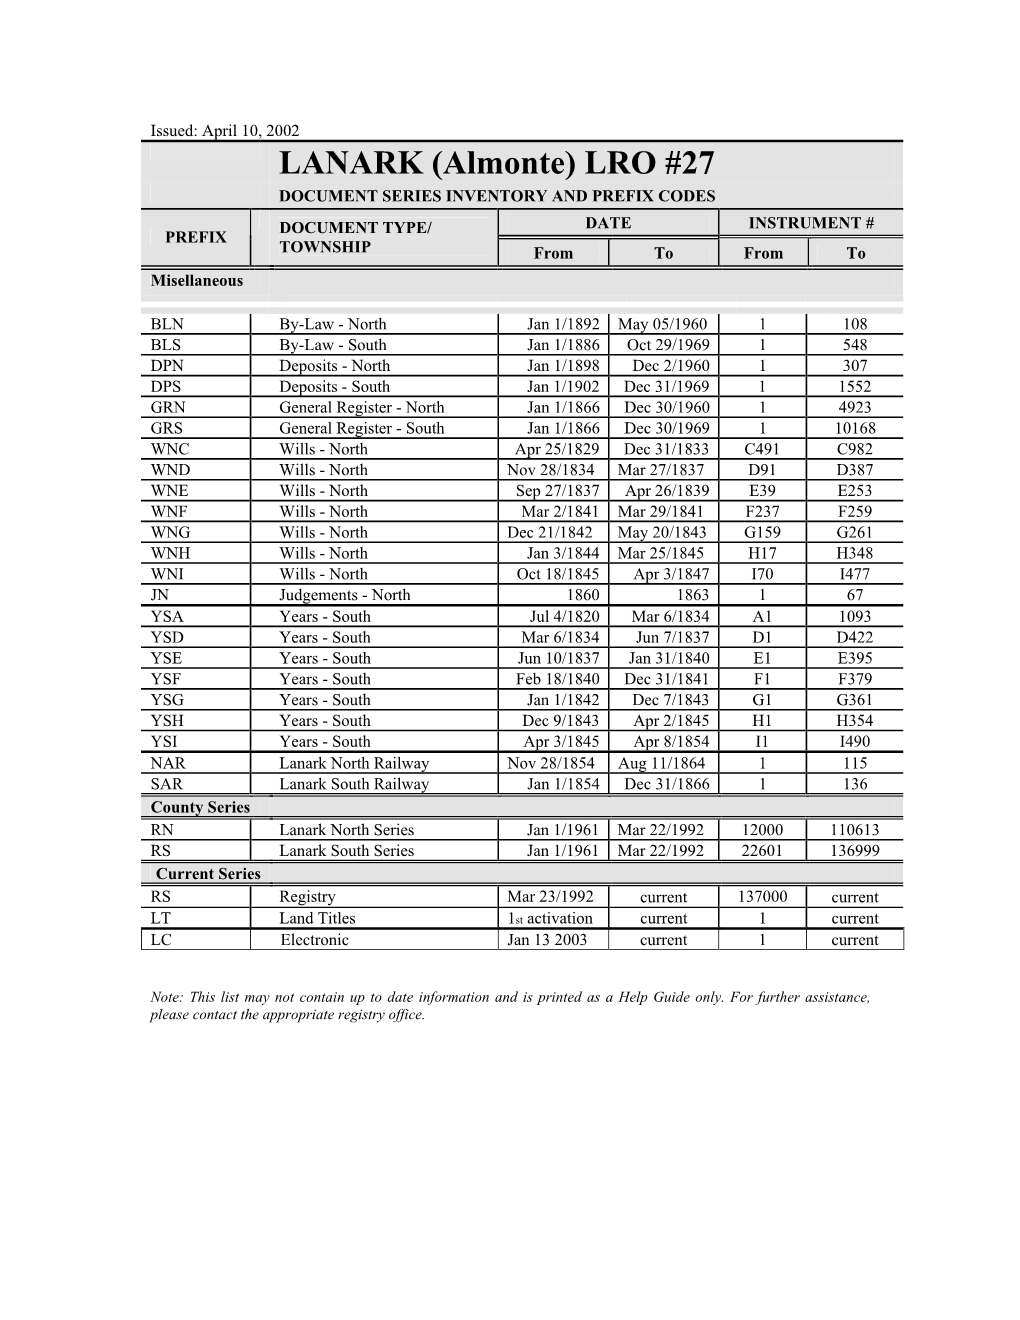 LANARK (Almonte) LRO #27 DOCUMENT SERIES INVENTORY and PREFIX CODES DOCUMENT TYPE/ DATE INSTRUMENT # PREFIX TOWNSHIP from to from to Misellaneous